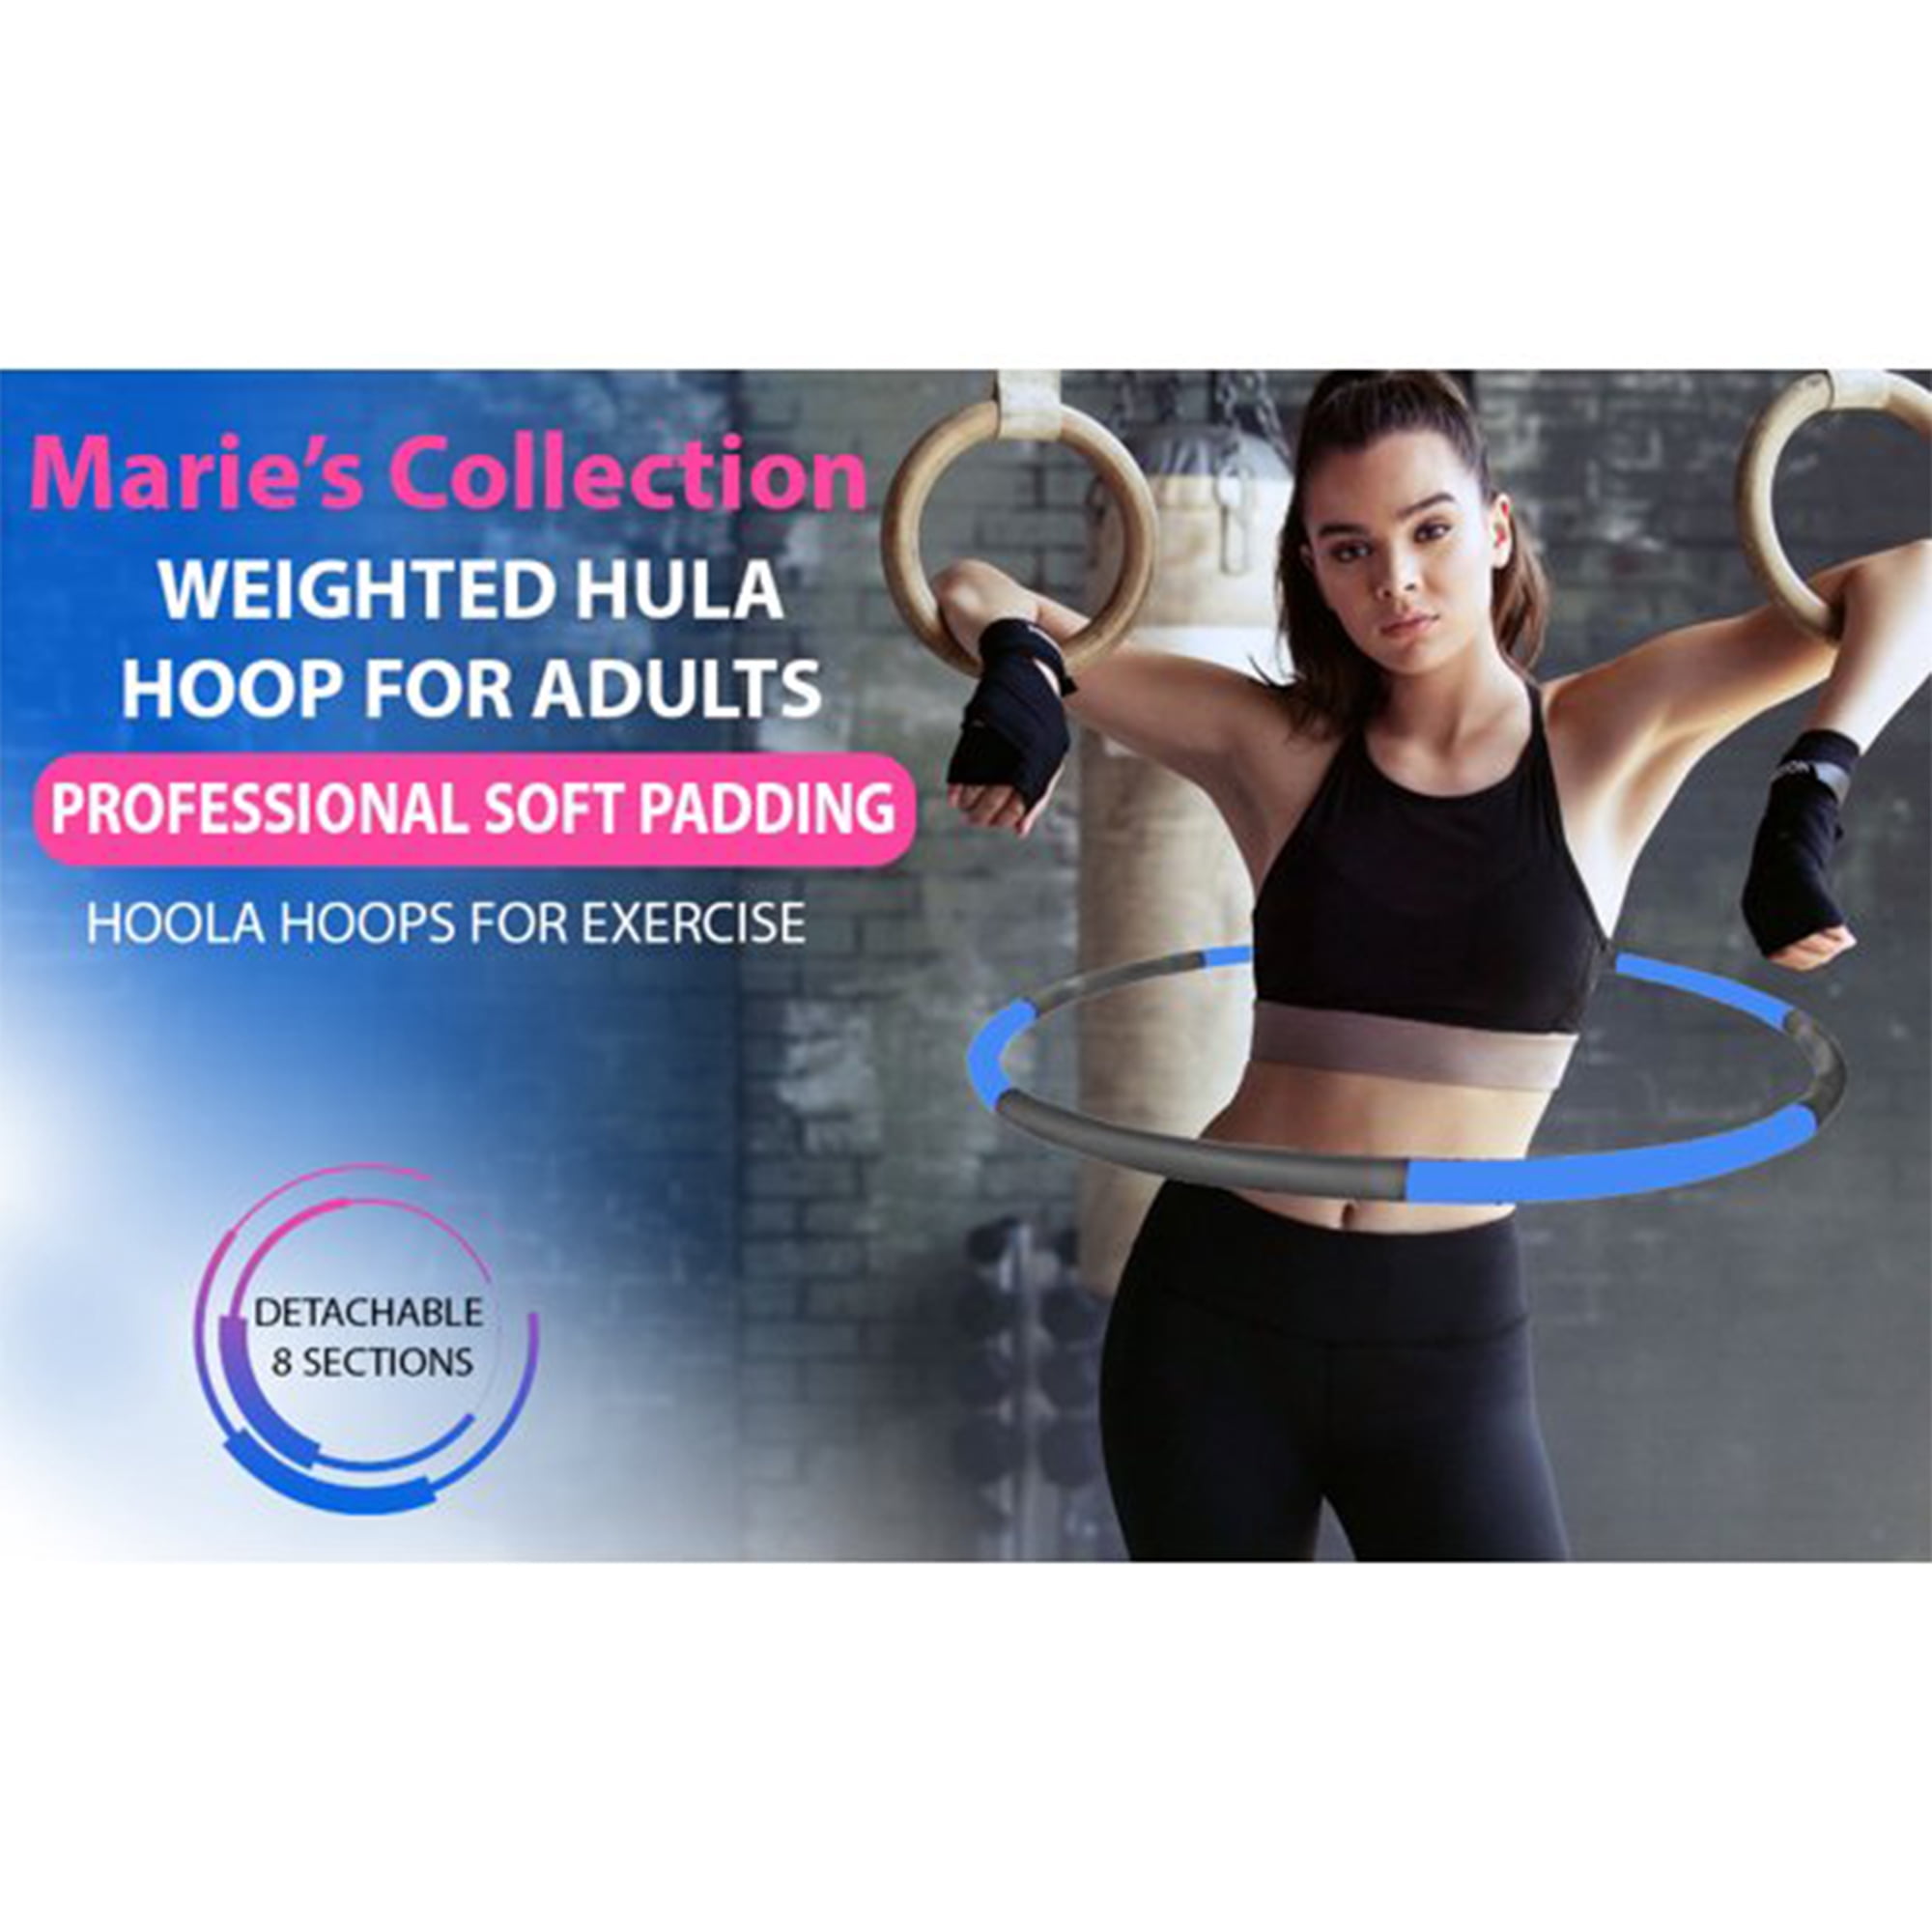 For Hula Hoop Adults Lose Weight Workout Fitness Exercise Soft Padding Design US 